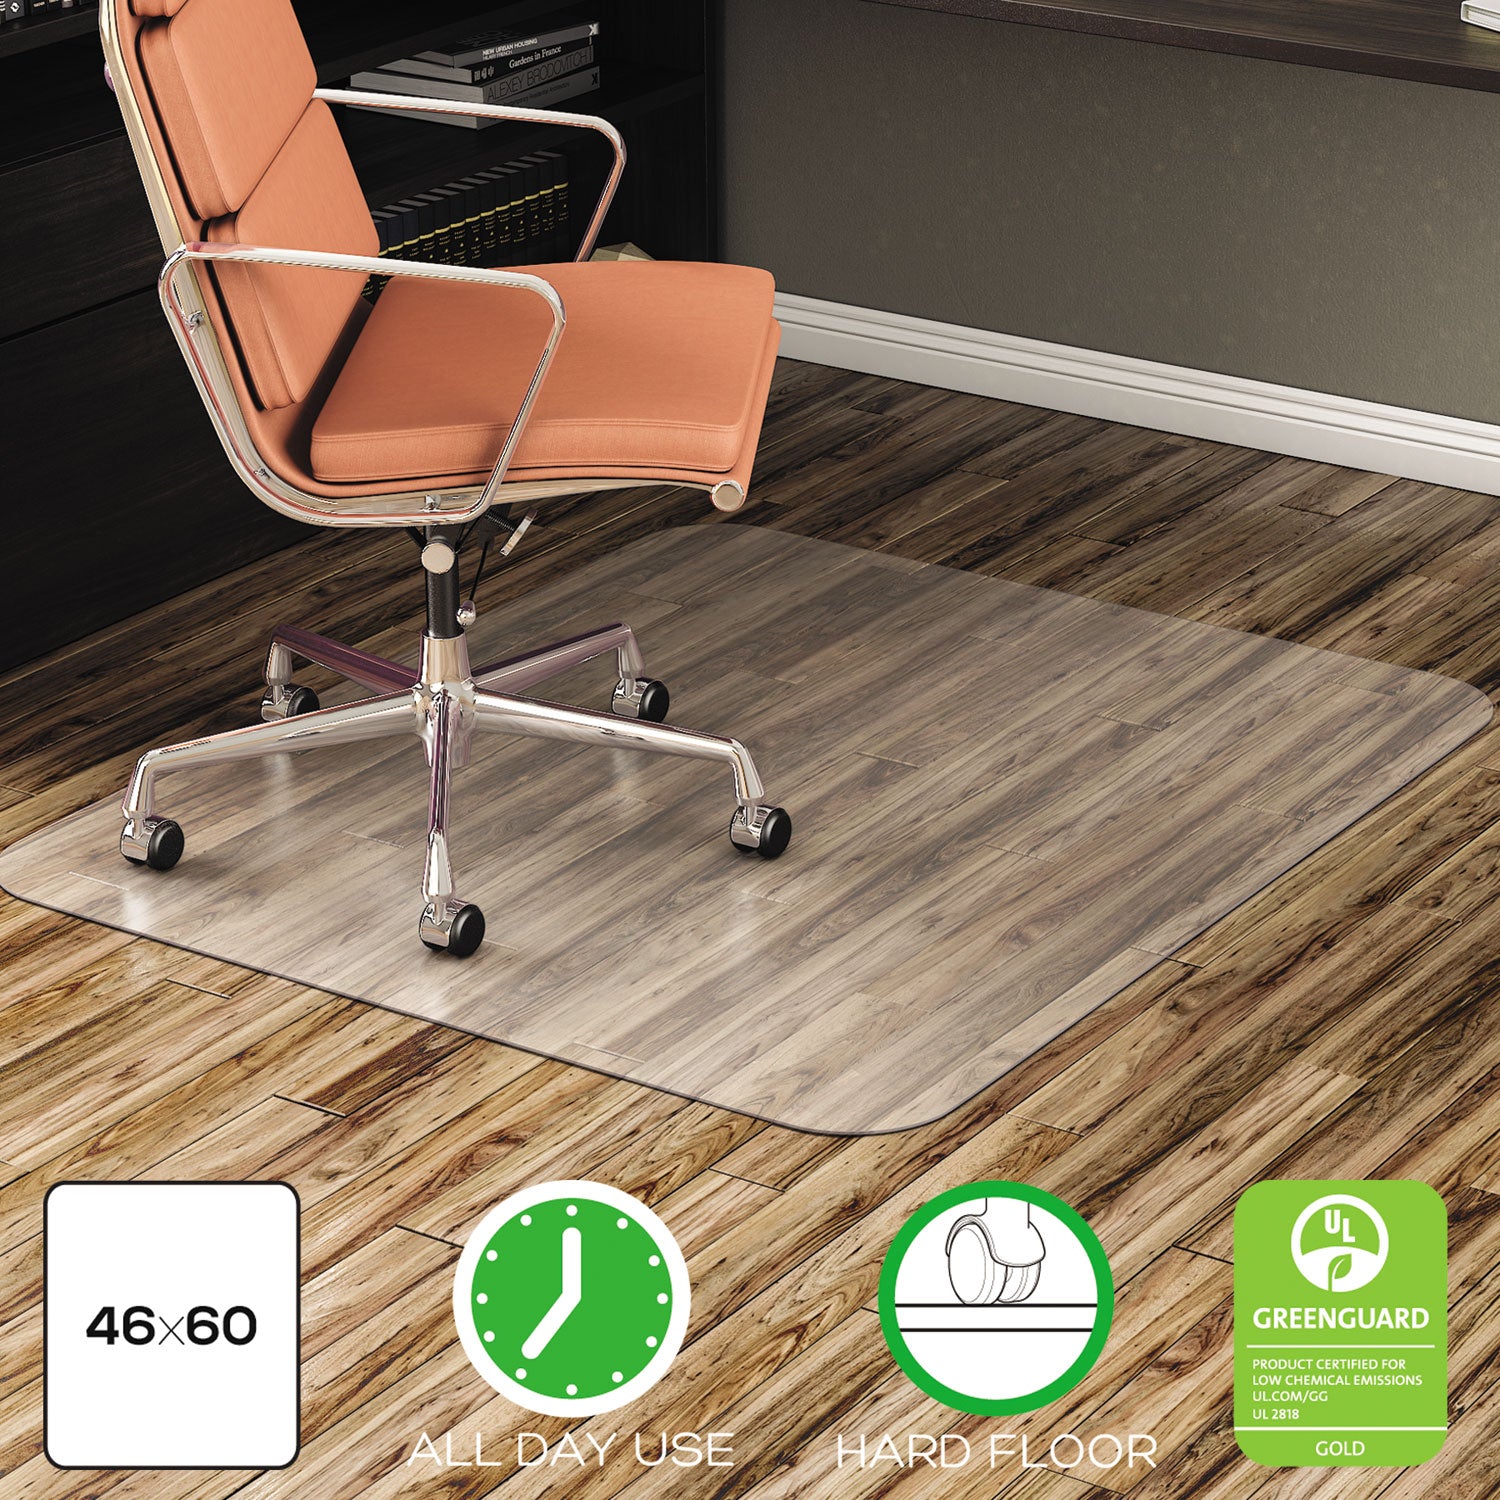 EconoMat All Day Use Chair Mat for Hard Floors, Flat Packed, 46 x 60, Clear - 